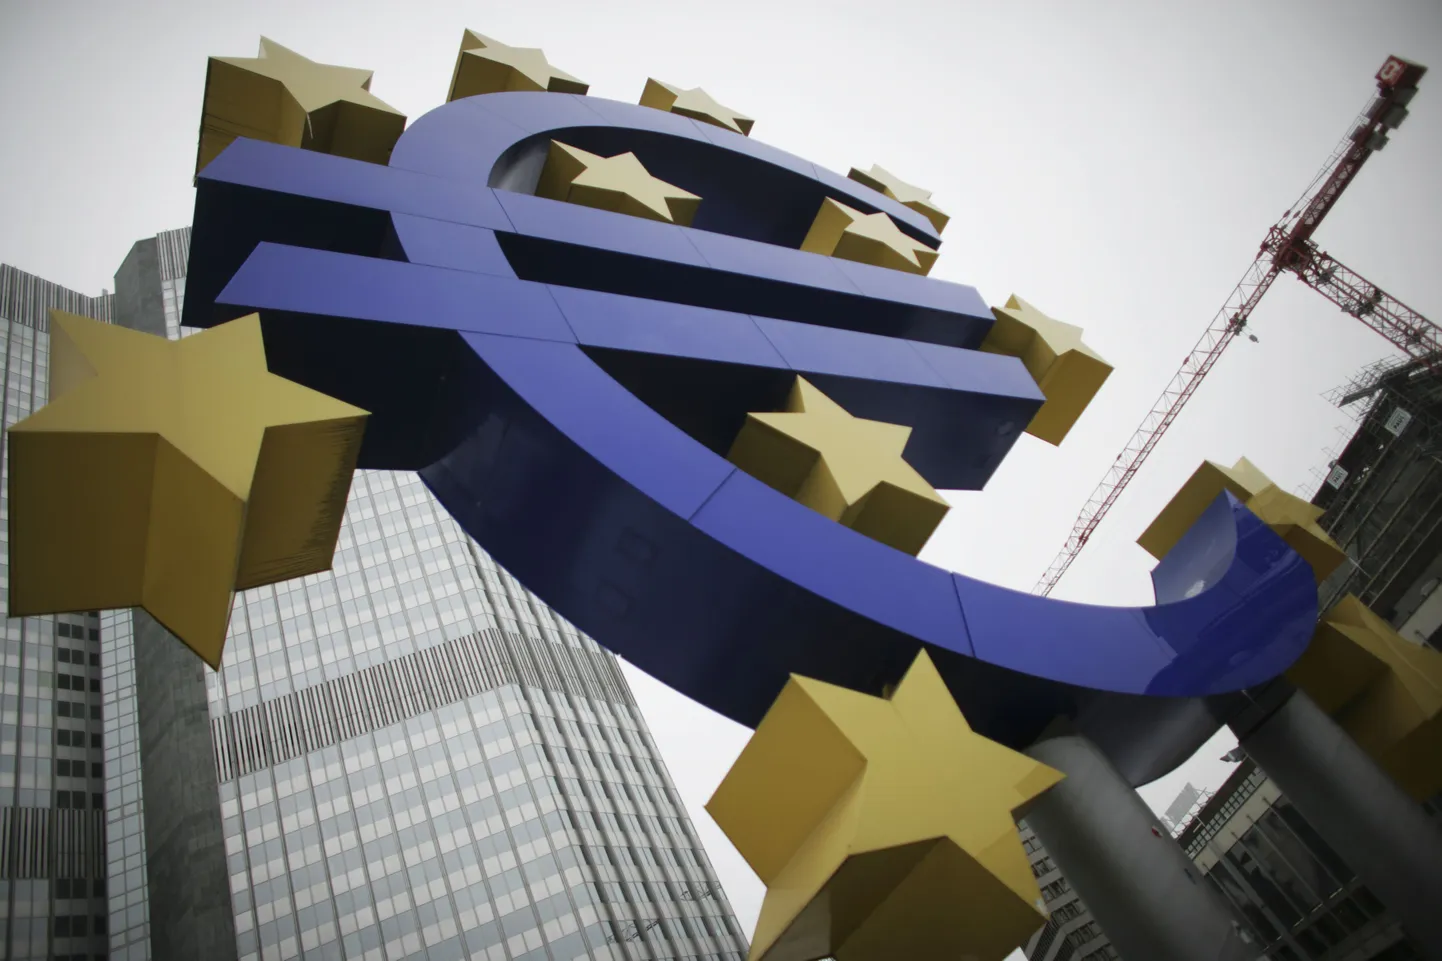 A sculpture showing the Euro currency sign is seen in front of the European Central Bank (ECB) headquarters in Frankfurt, December 5, 2010. REUTERS/Alex Domanski (GERMANY - Tags: BUSINESS)